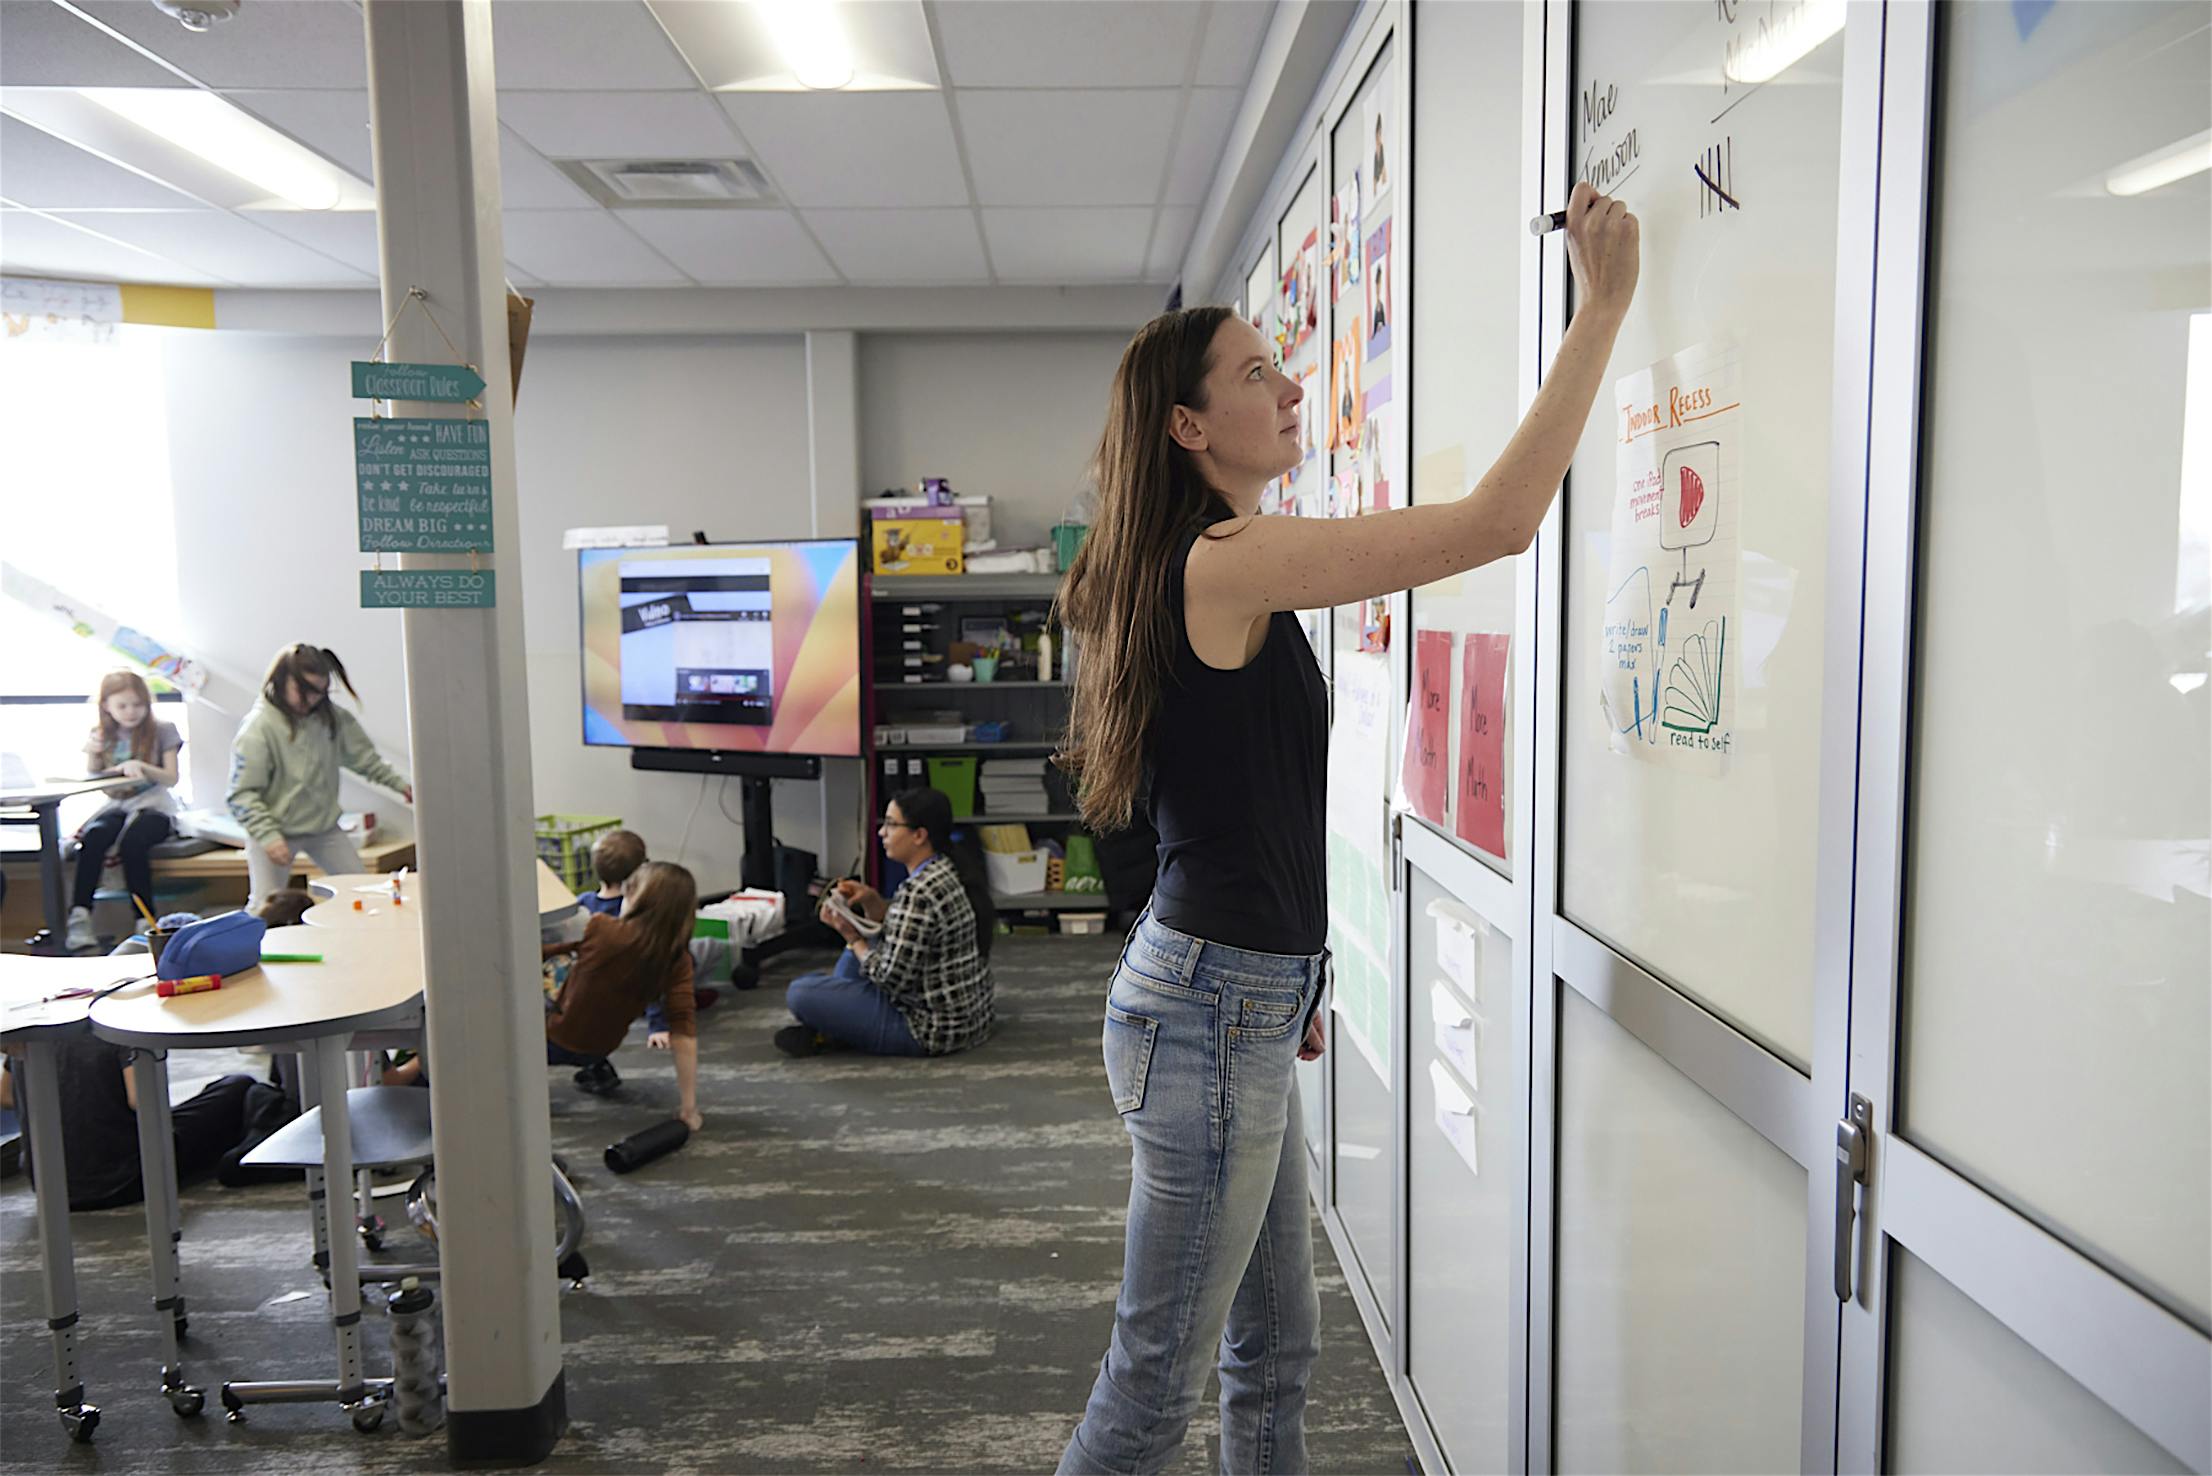 interior glass walls as whiteboards